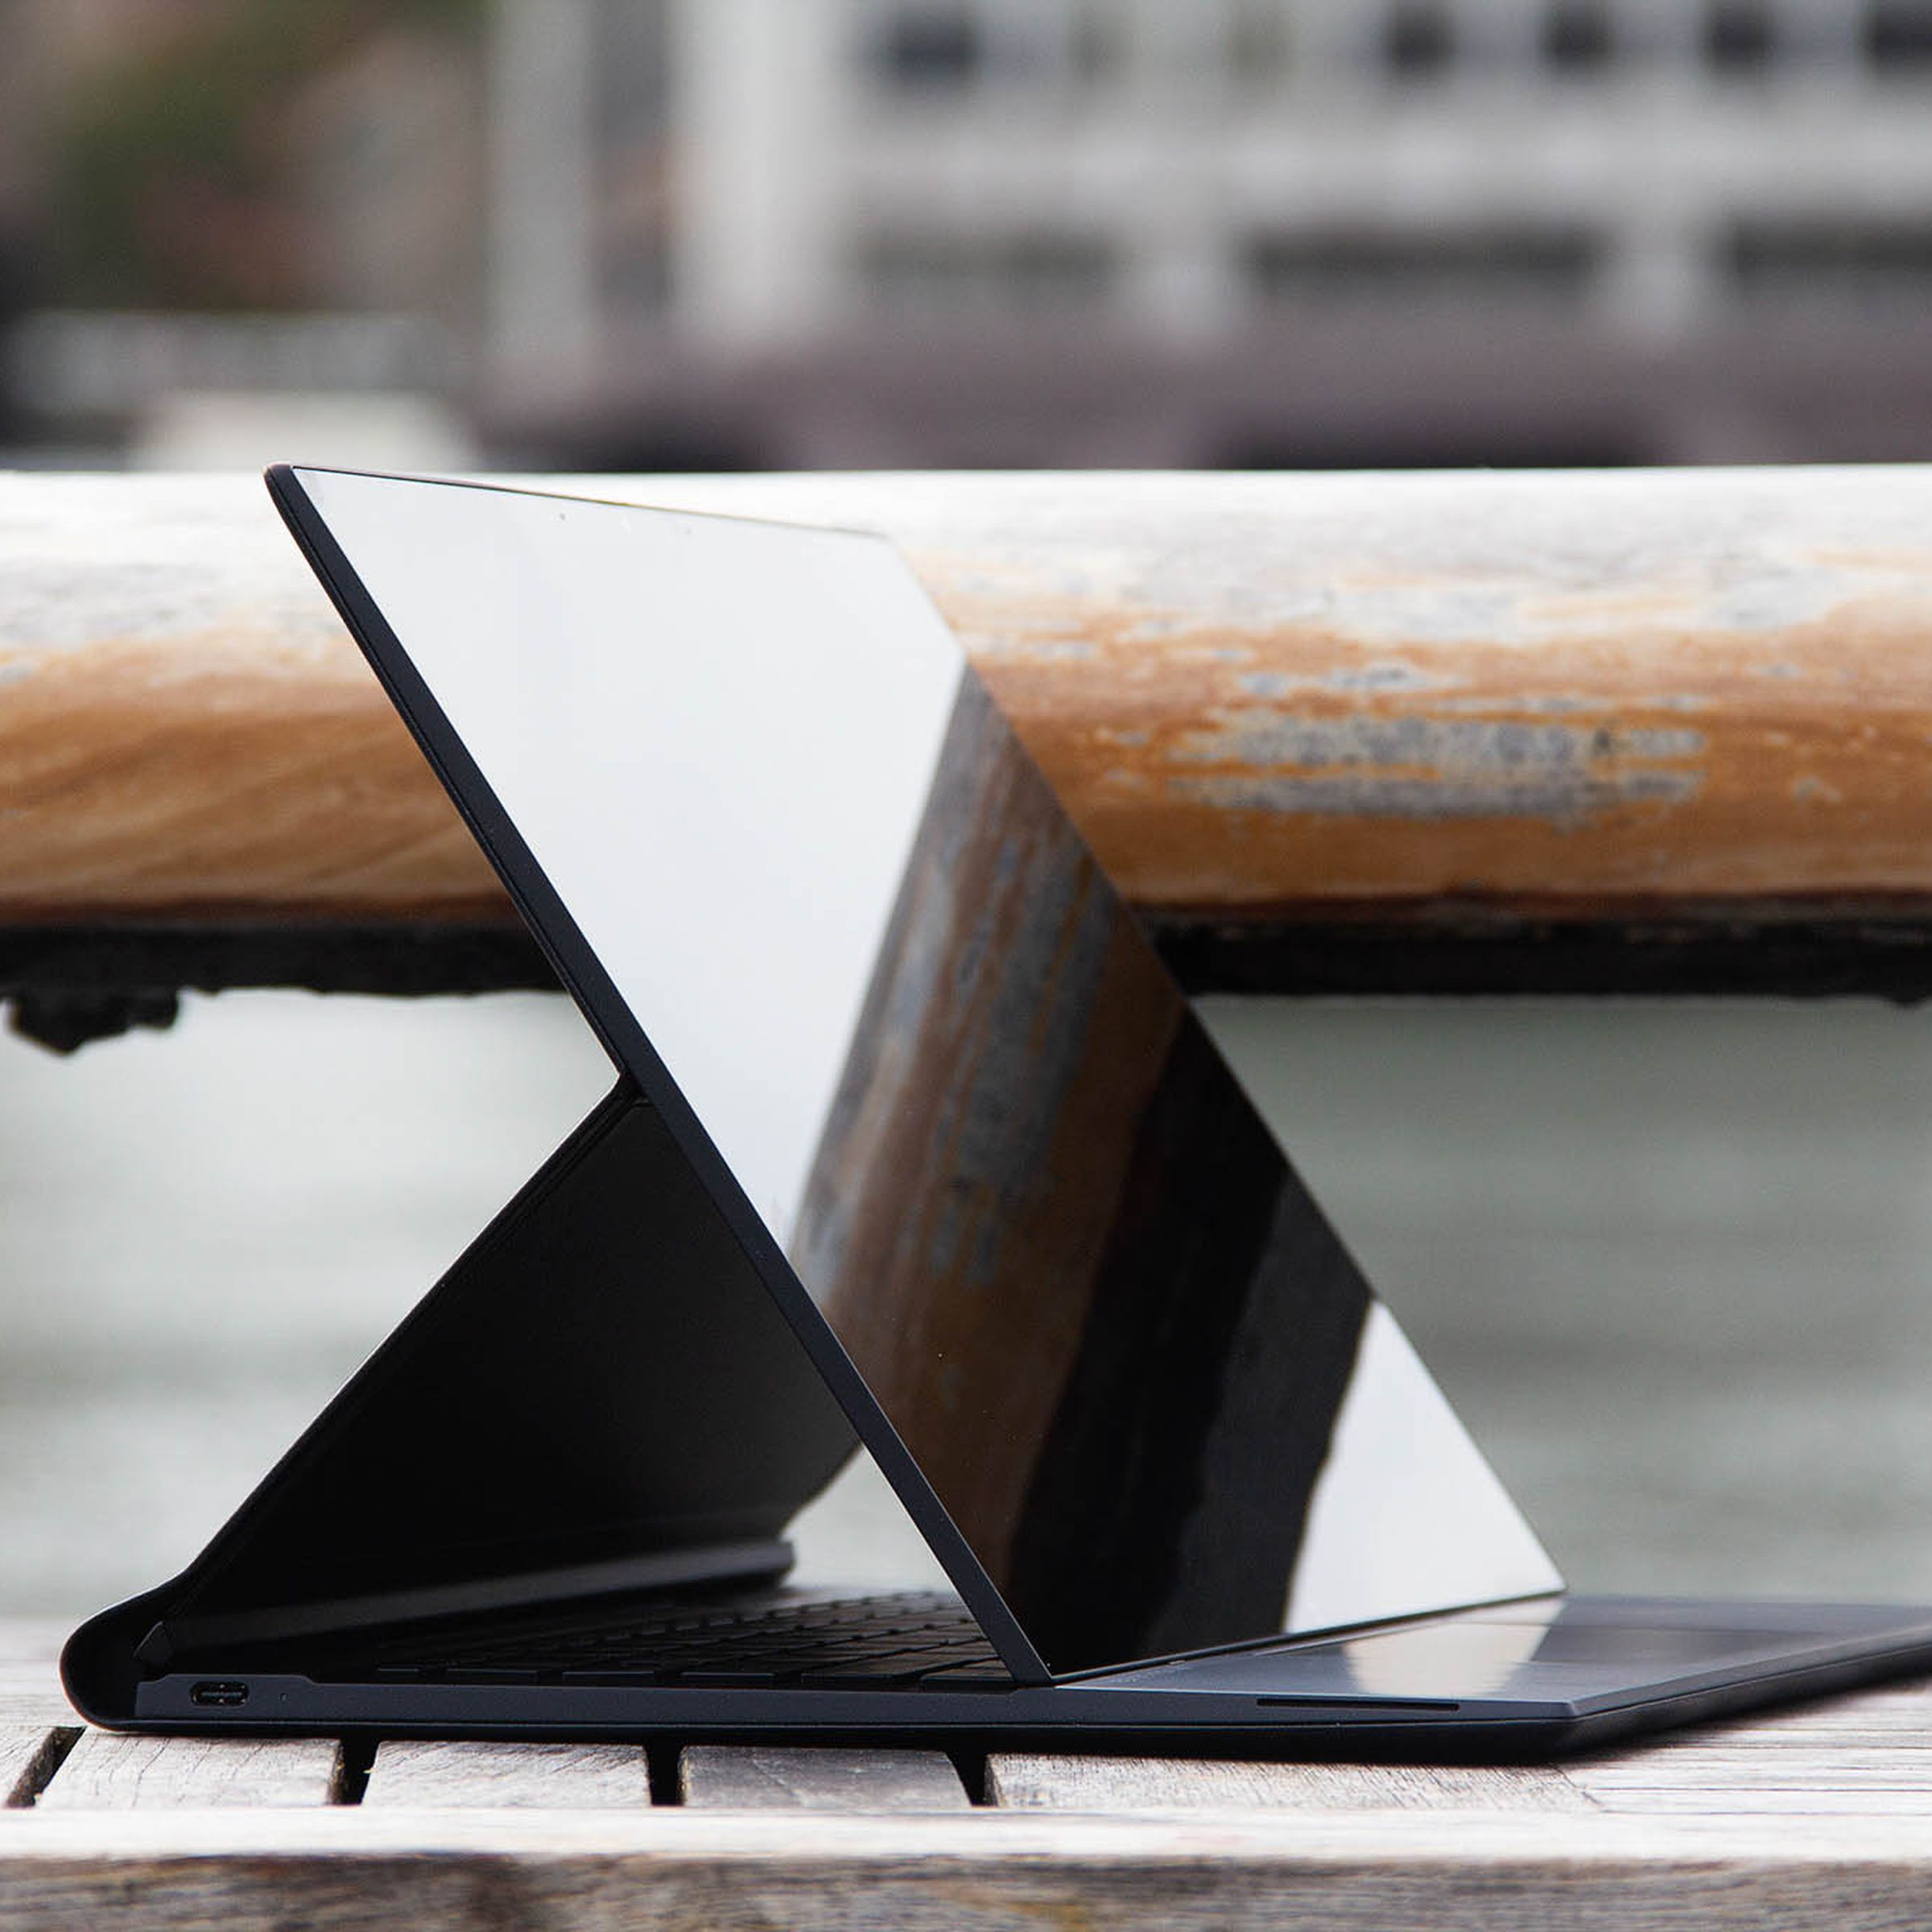 The HP Elite Folio in easel mode, angled to the right, on an outdoor table with a river in the background.